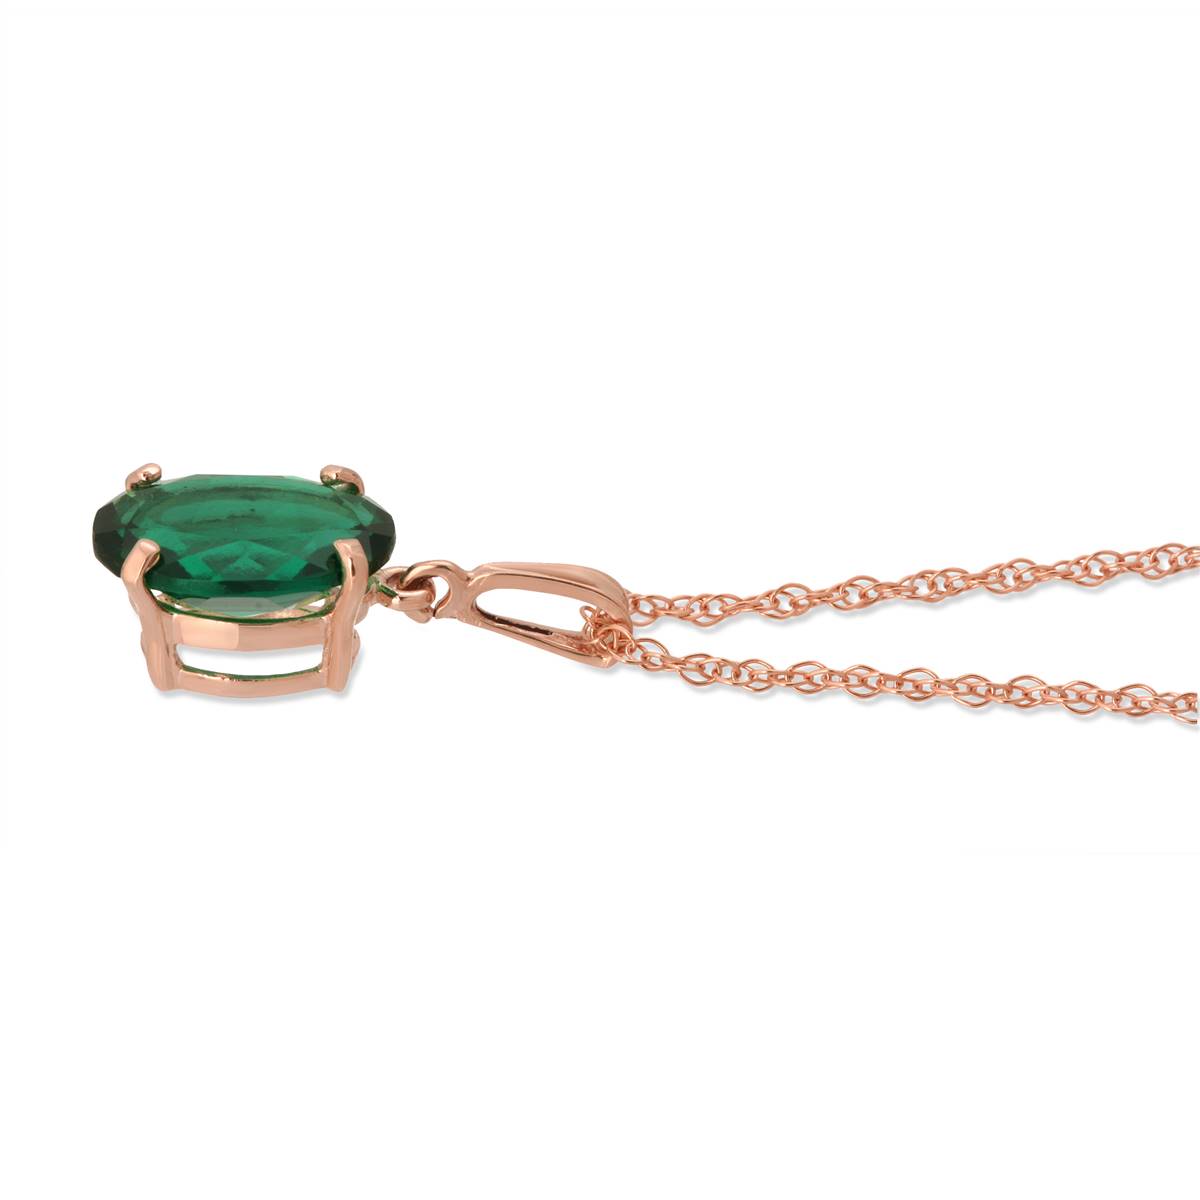 14K Solid Rose Gold Necklace With Oval Shape 1.90 ctw High Polished Genuine Emerald - Grade AAA